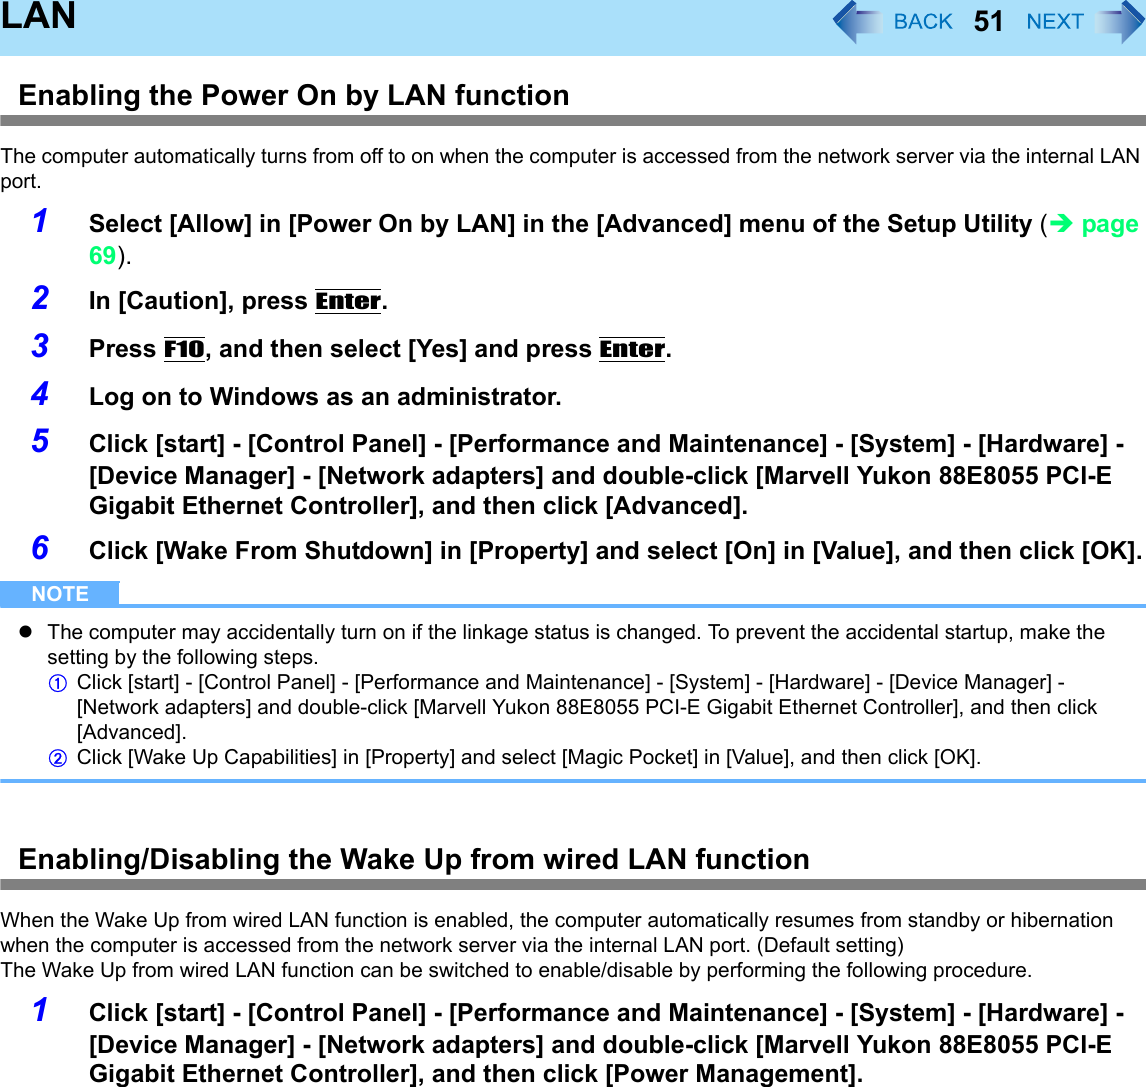 51LANEnabling the Power On by LAN functionThe computer automatically turns from off to on when the computer is accessed from the network server via the internal LAN port.1Select [Allow] in [Power On by LAN] in the [Advanced] menu of the Setup Utility (Îpage 69).2In [Caution], press Enter.3Press F10, and then select [Yes] and press Enter.4Log on to Windows as an administrator.5Click [start] - [Control Panel] - [Performance and Maintenance] - [System] - [Hardware] - [Device Manager] - [Network adapters] and double-click [Marvell Yukon 88E8055 PCI-E Gigabit Ethernet Controller], and then click [Advanced].6Click [Wake From Shutdown] in [Property] and select [On] in [Value], and then click [OK].NOTEzThe computer may accidentally turn on if the linkage status is changed. To prevent the accidental startup, make the setting by the following steps.AClick [start] - [Control Panel] - [Performance and Maintenance] - [System] - [Hardware] - [Device Manager] - [Network adapters] and double-click [Marvell Yukon 88E8055 PCI-E Gigabit Ethernet Controller], and then click [Advanced].BClick [Wake Up Capabilities] in [Property] and select [Magic Pocket] in [Value], and then click [OK].Enabling/Disabling the Wake Up from wired LAN functionWhen the Wake Up from wired LAN function is enabled, the computer automatically resumes from standby or hibernation when the computer is accessed from the network server via the internal LAN port. (Default setting)The Wake Up from wired LAN function can be switched to enable/disable by performing the following procedure.1Click [start] - [Control Panel] - [Performance and Maintenance] - [System] - [Hardware] - [Device Manager] - [Network adapters] and double-click [Marvell Yukon 88E8055 PCI-E Gigabit Ethernet Controller], and then click [Power Management].